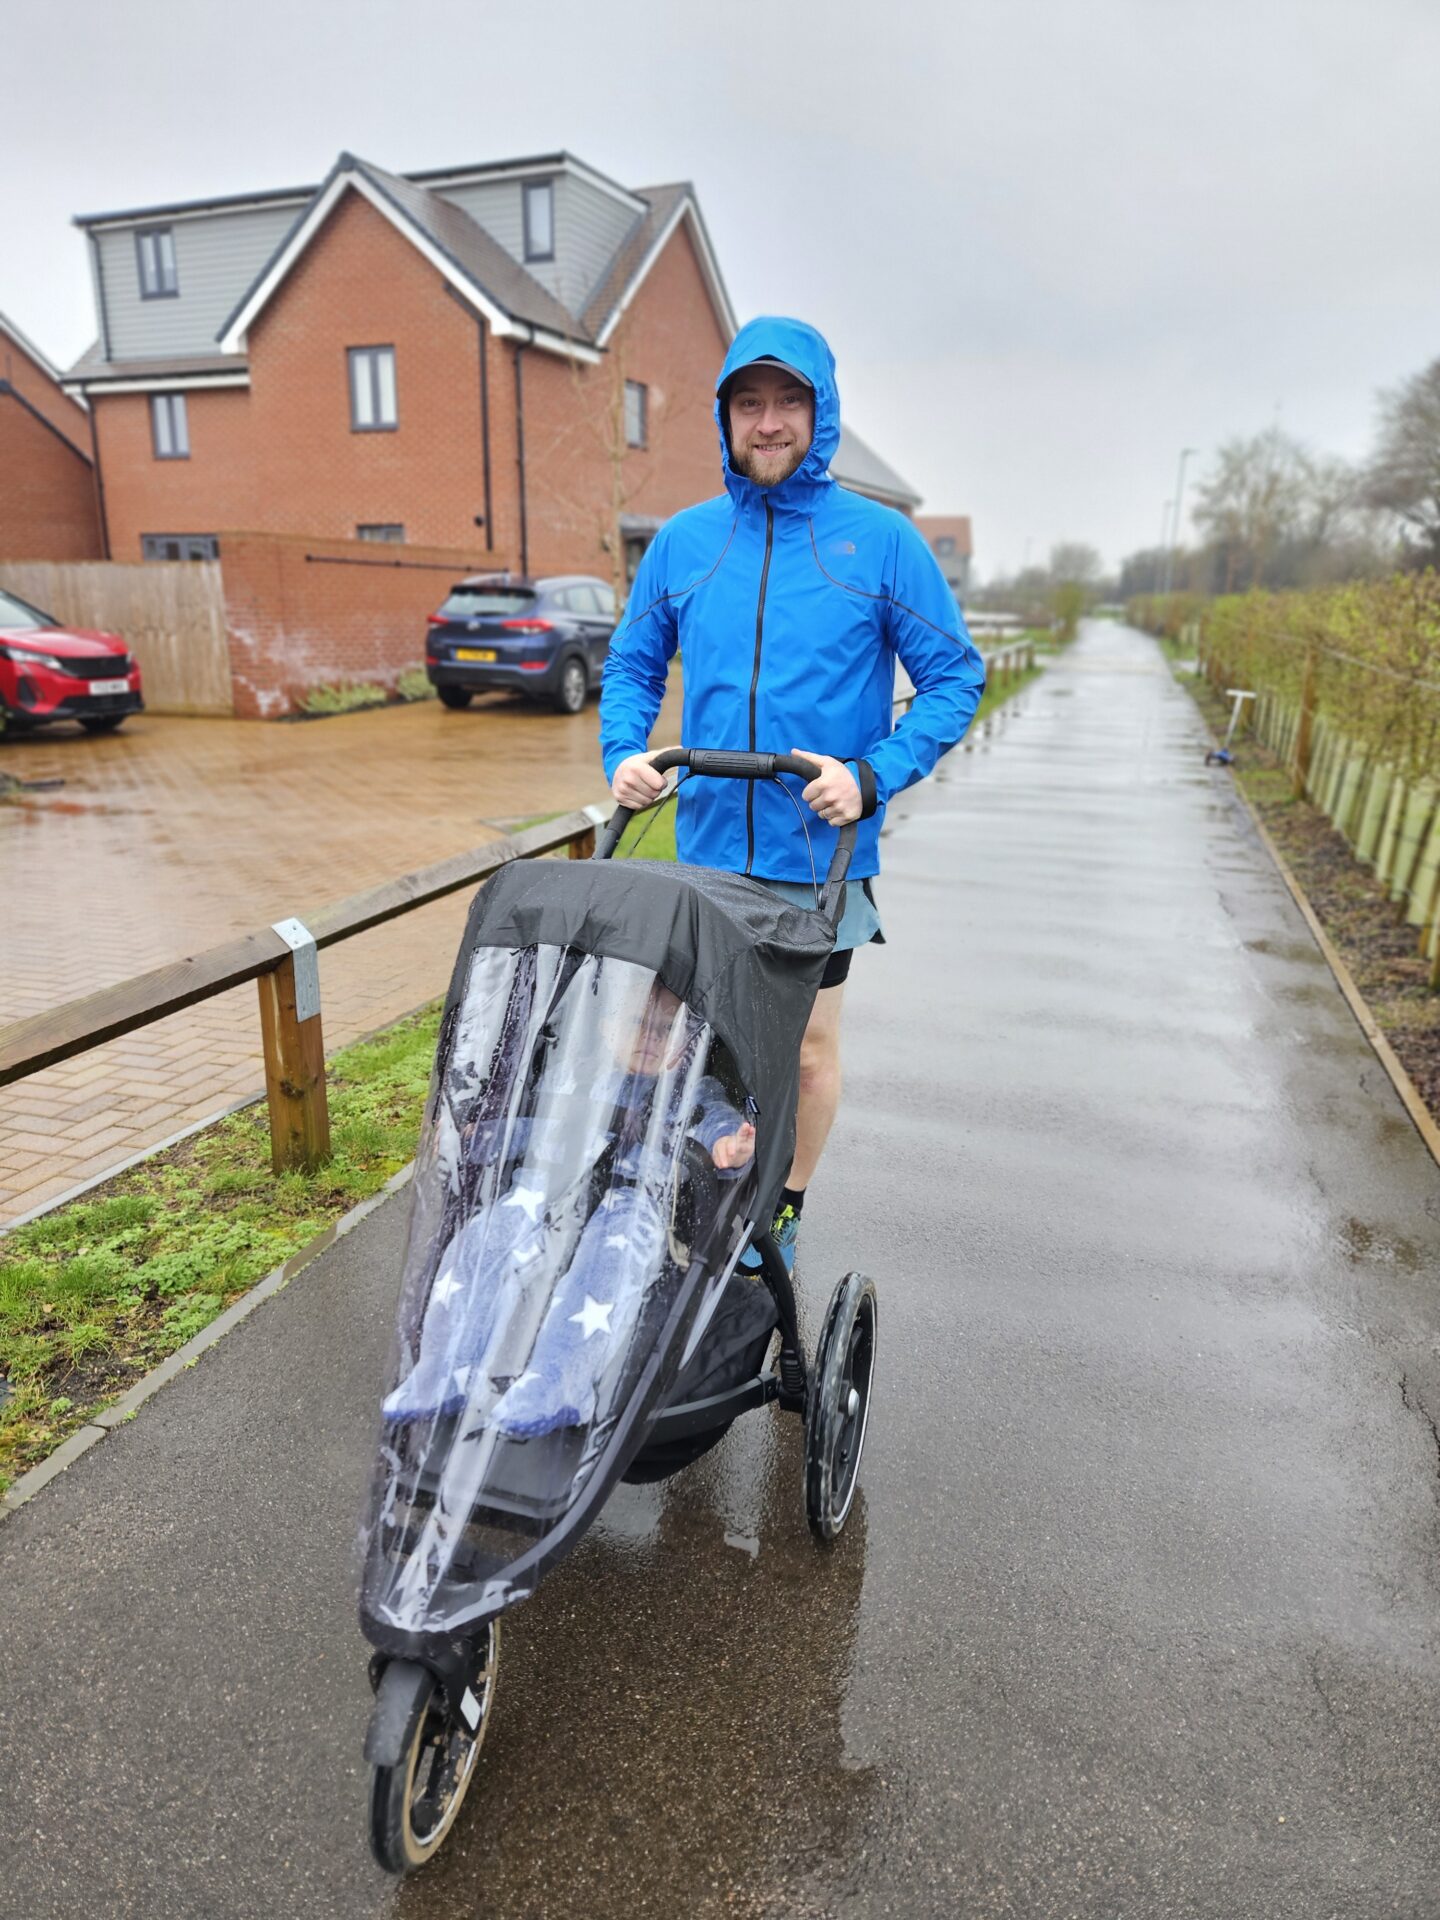 Man wearing blue waterproof coat pushes a running buggy with raincover on 